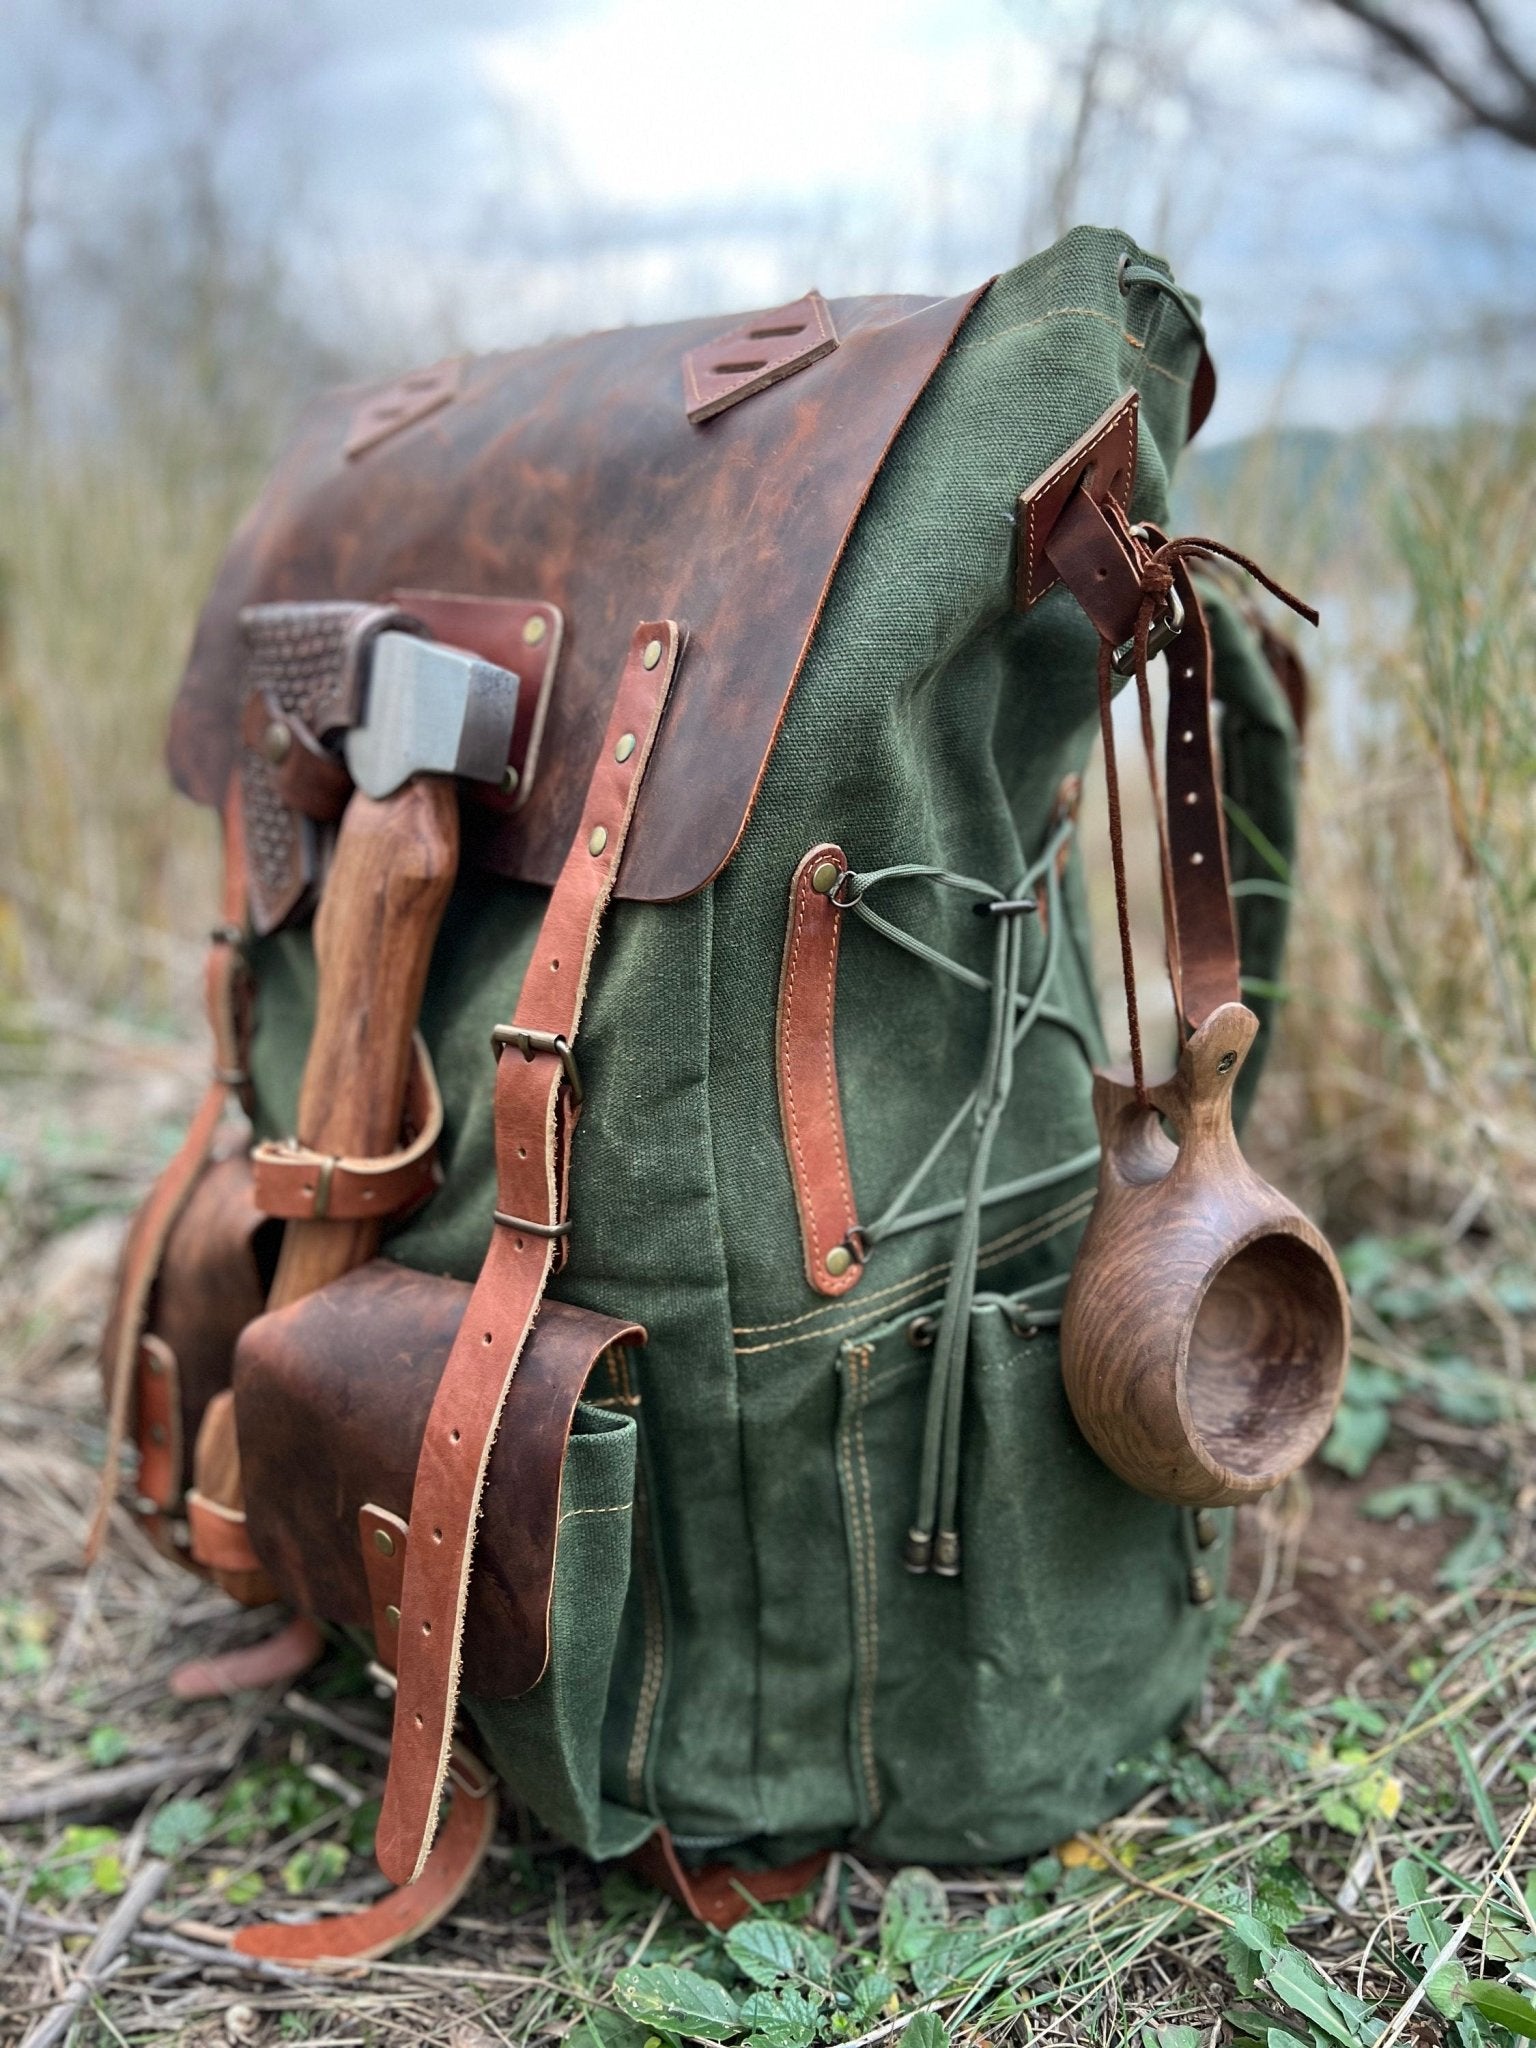 Handmade Bushcraft Backpack Camping Backpack Leather and Waxed 